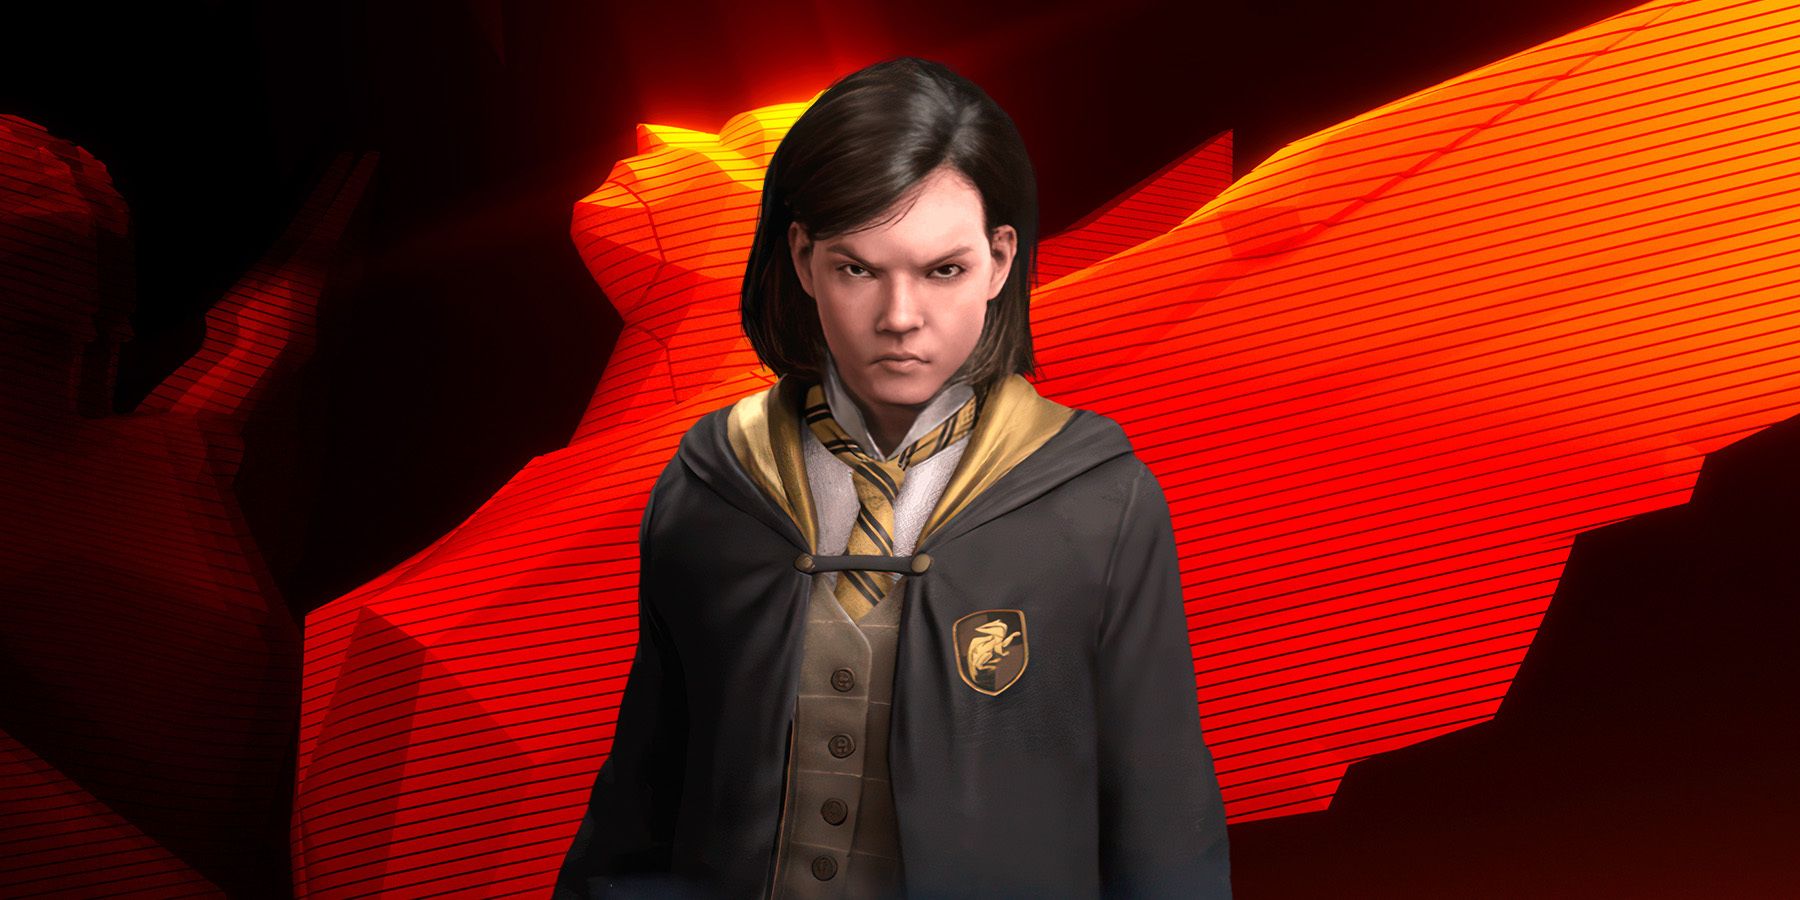 Hogwarts Legacy': Harry Potter-themed game faces criticism – DW – 02/08/2023